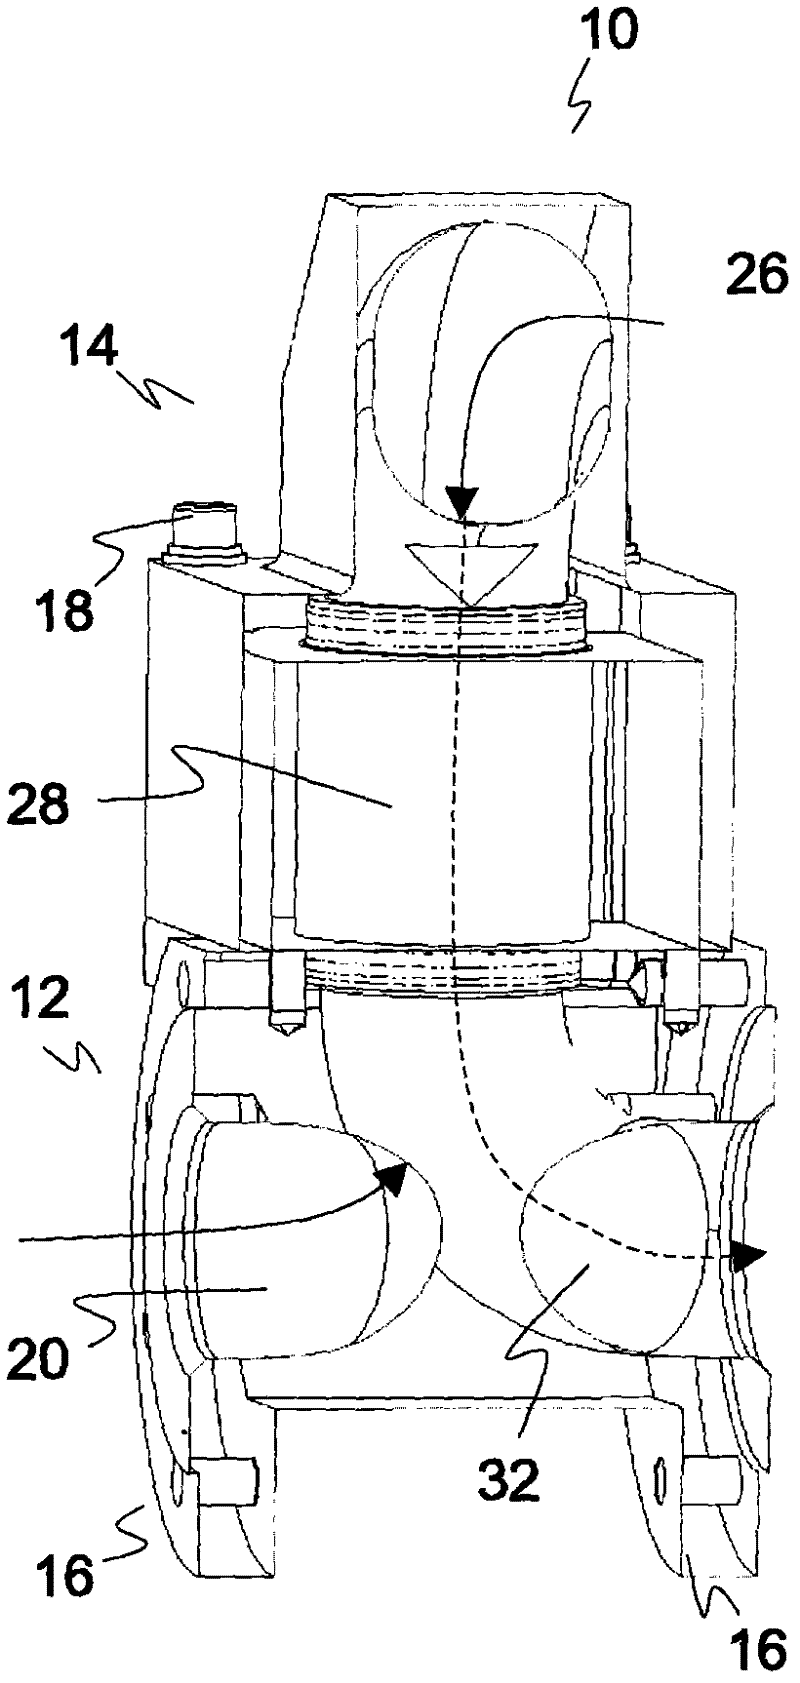 Ultrasound measuring device and method for monitoring the flow speed of a liquid